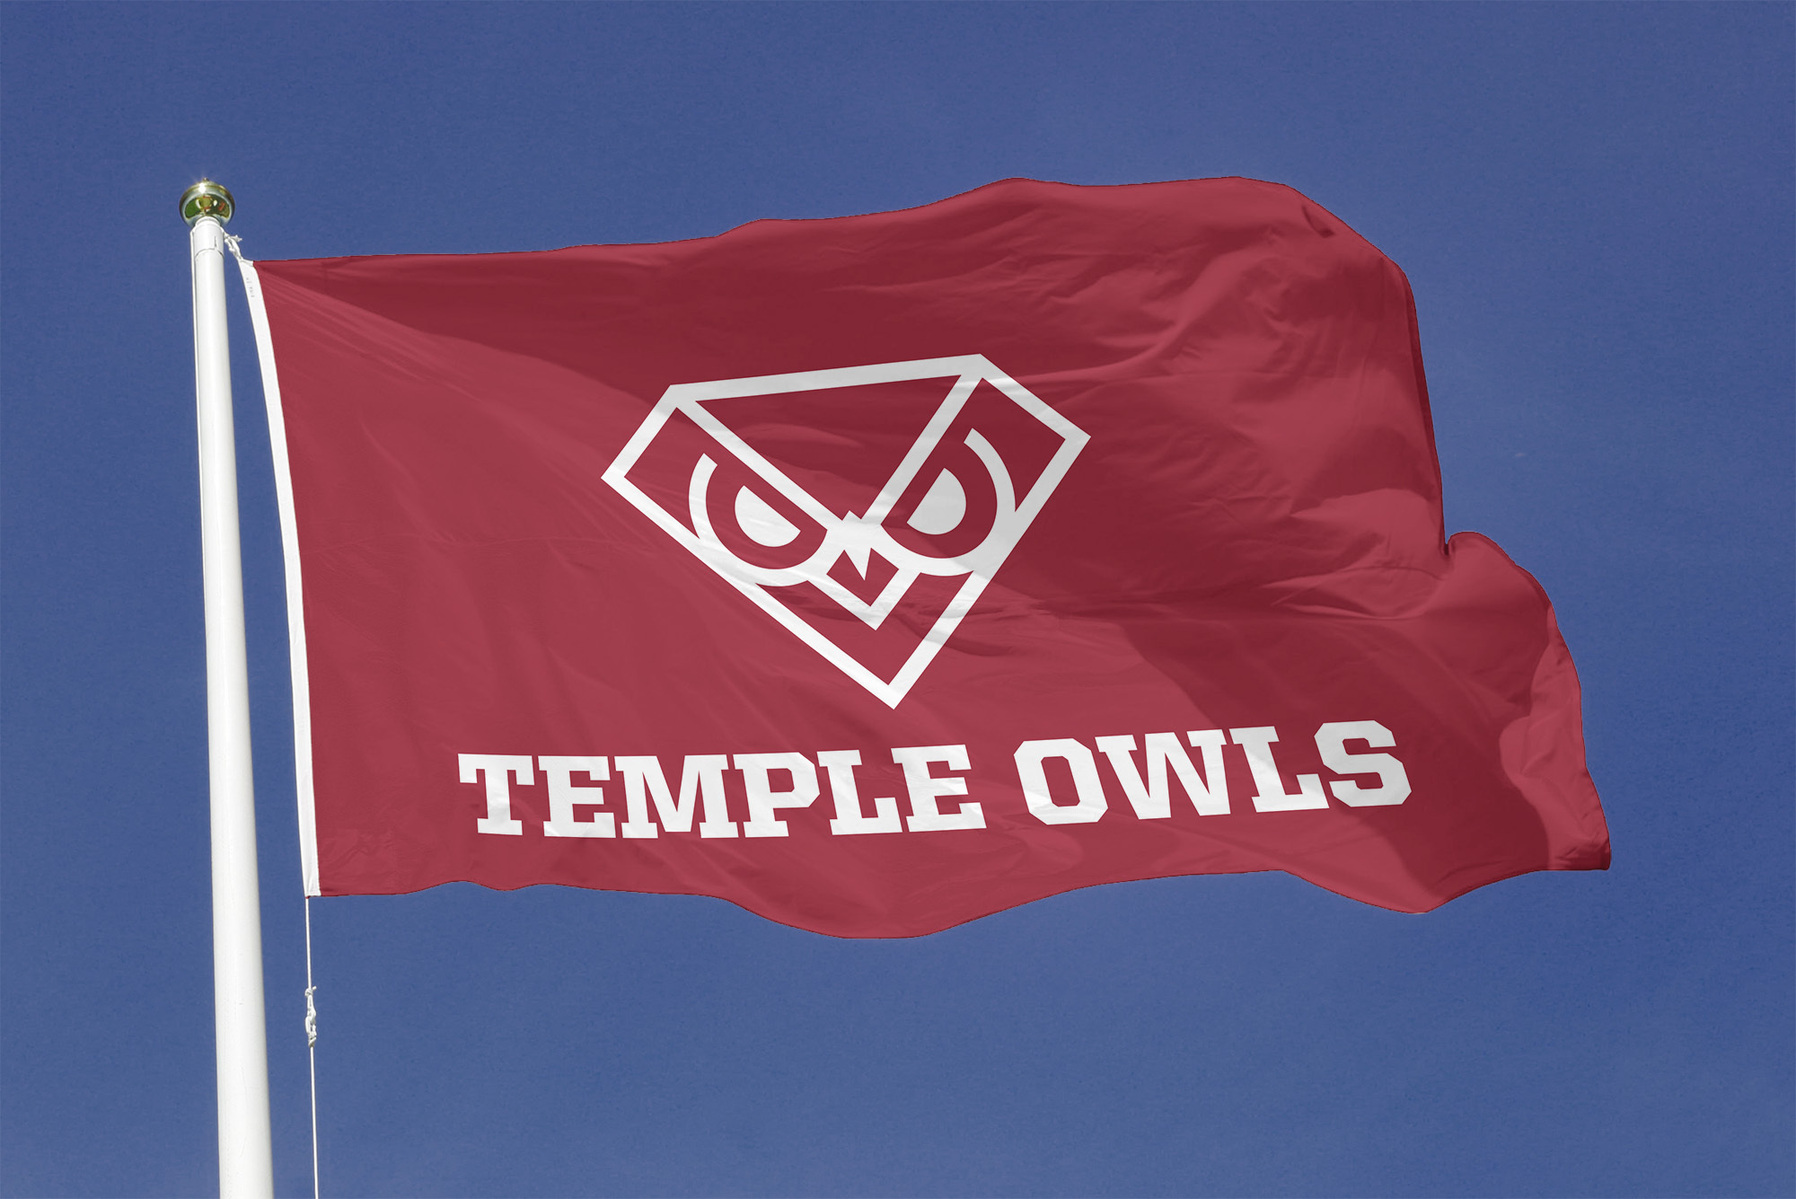 Proposed Temple Owl logo on flag